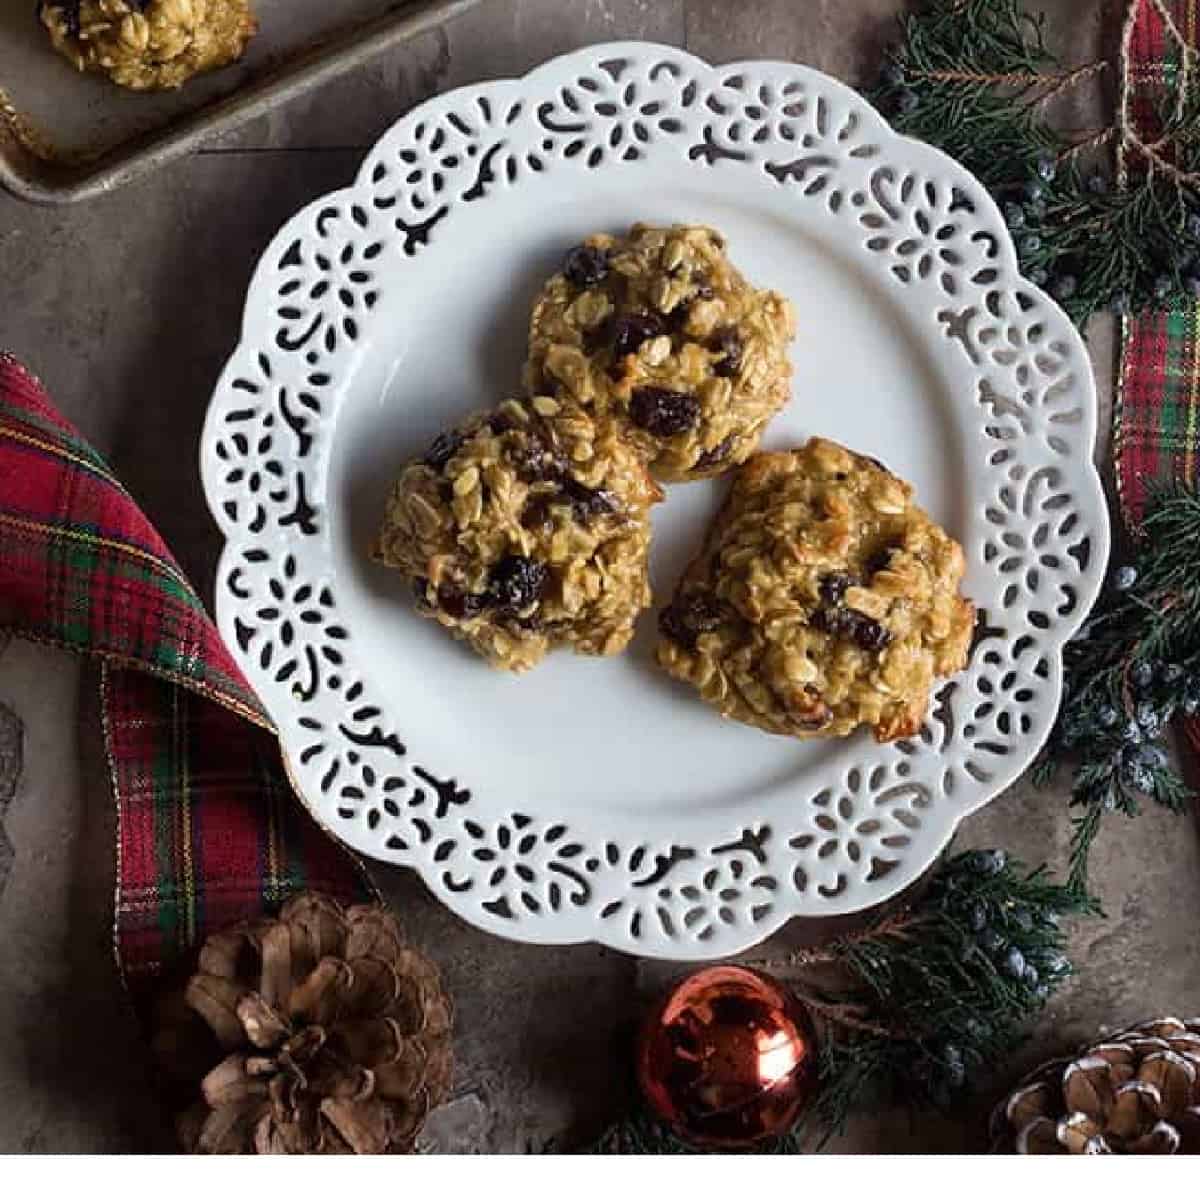 Learn how to make oatmeal cookies without butter that are chewy and delicious. These healthy oatmeal raisin cookies are naturally sweetened.
